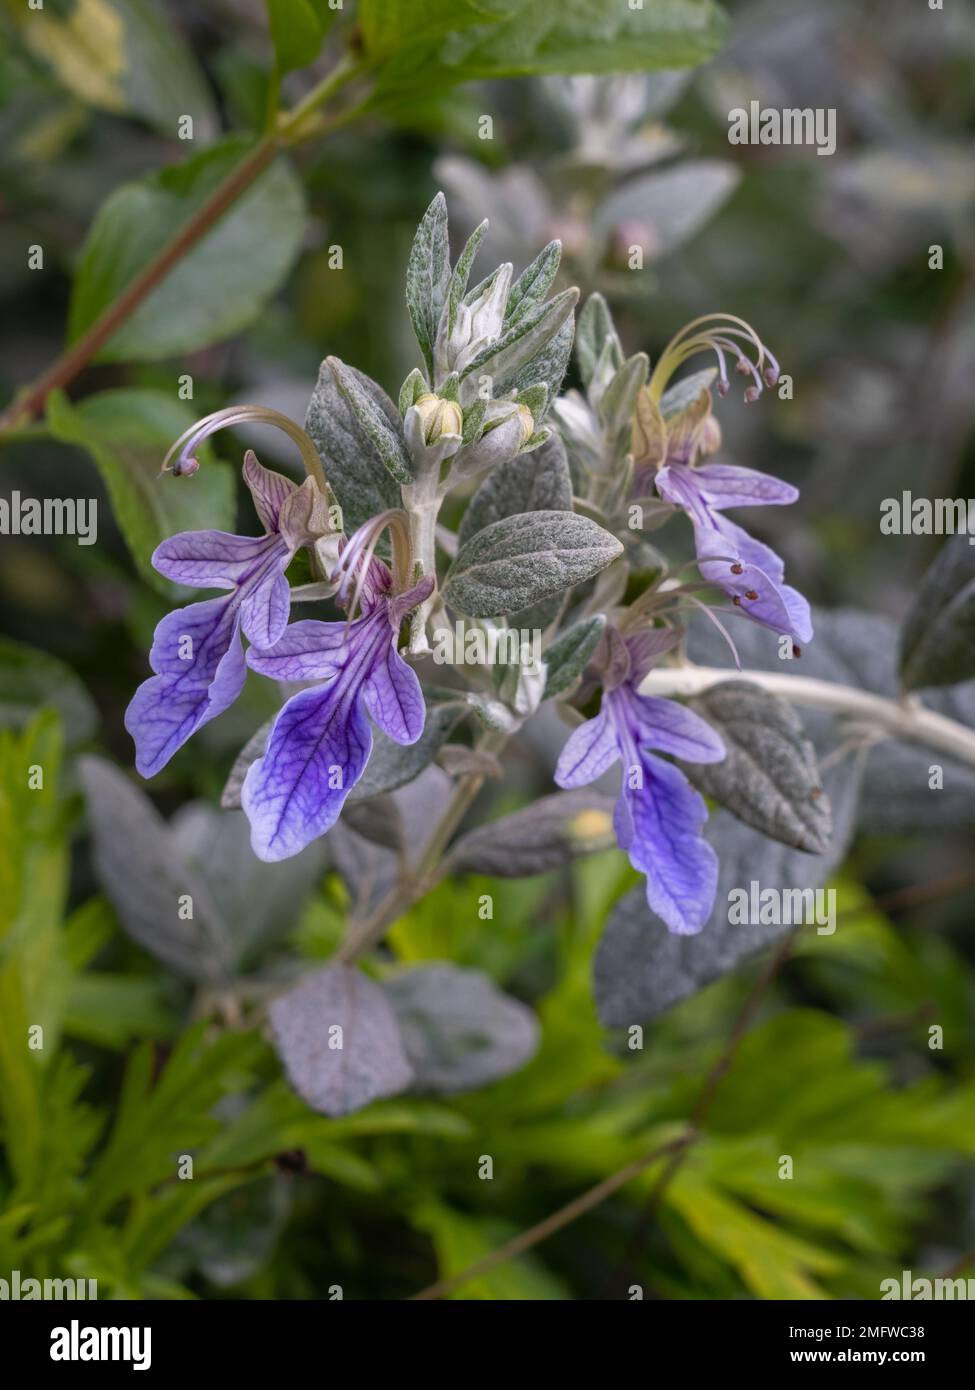 Closeup view of purple blue flowers and silver foliage of teucrium fruticans shrub aka tree germander or shrubby germander outdoors in garden Stock Photo